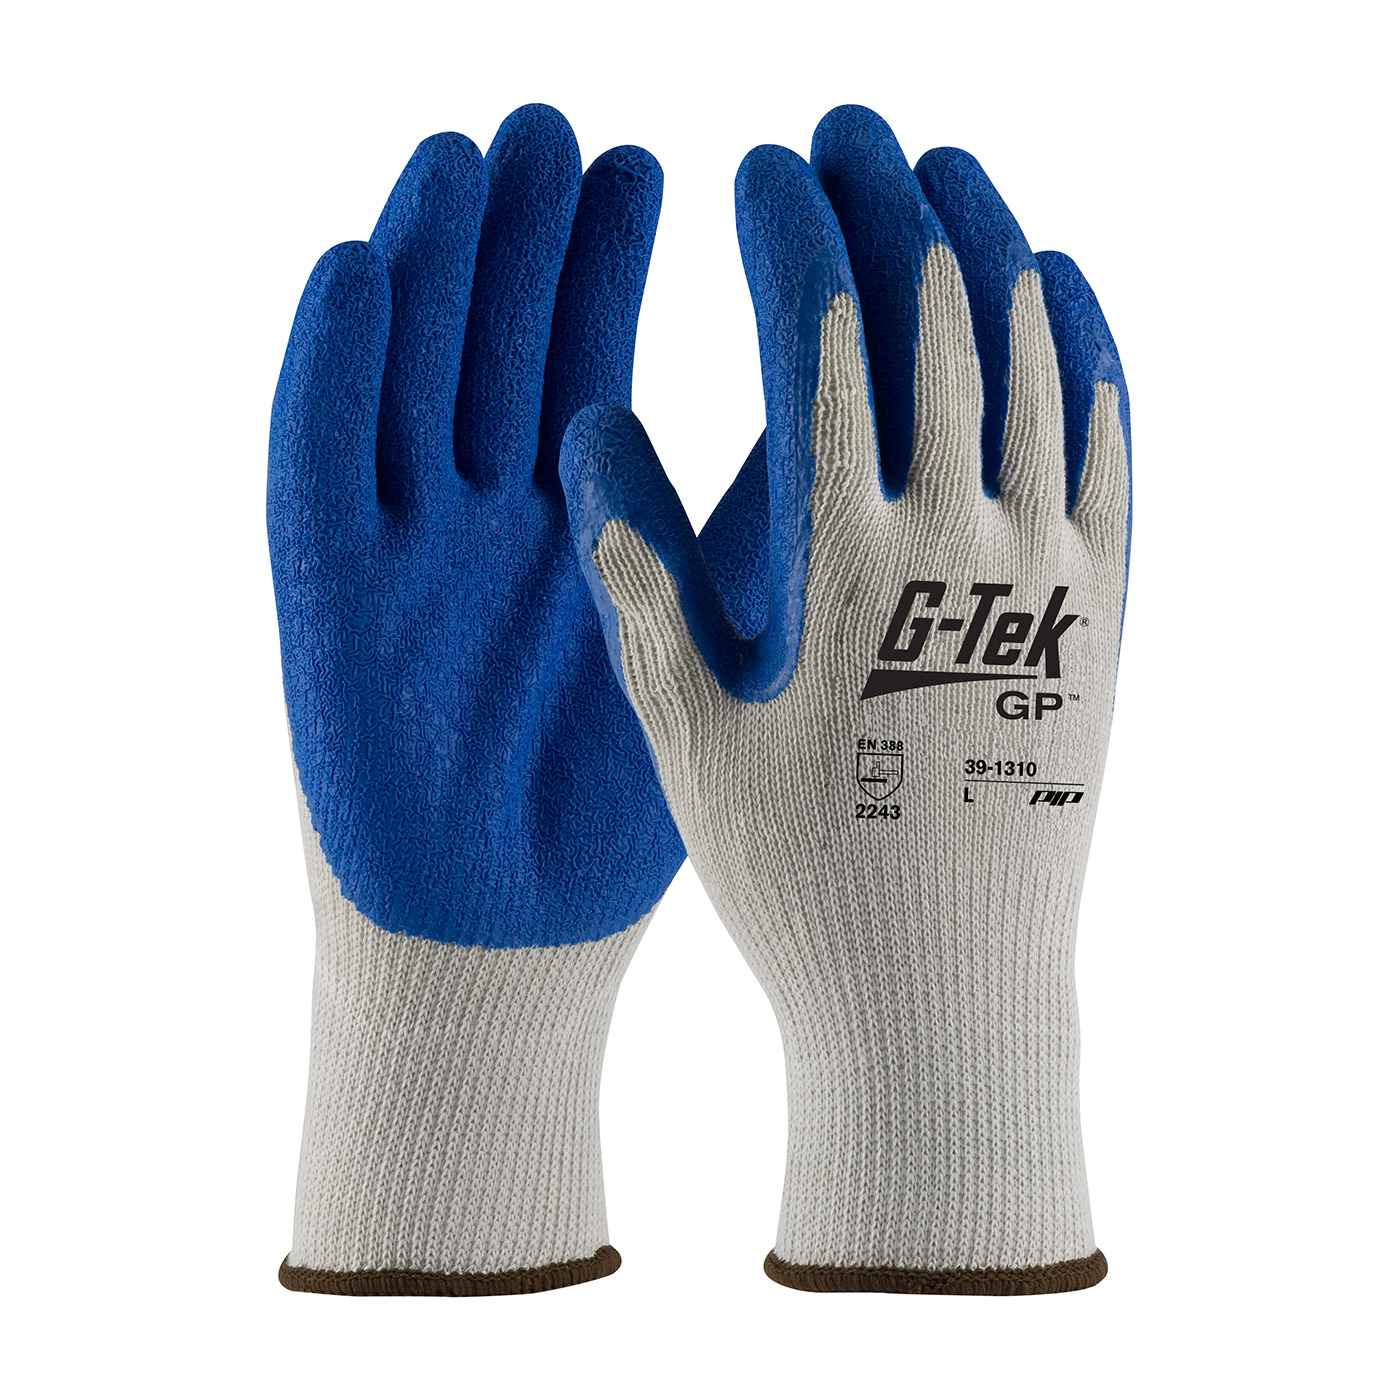 PIP 39-1310/L G-Tek GP Seamless Knit Cotton/Polyester Glove with Latex Coated Crinkle Grip on Palm & Fingers - Economy Grade - Large PID-39 1310 L